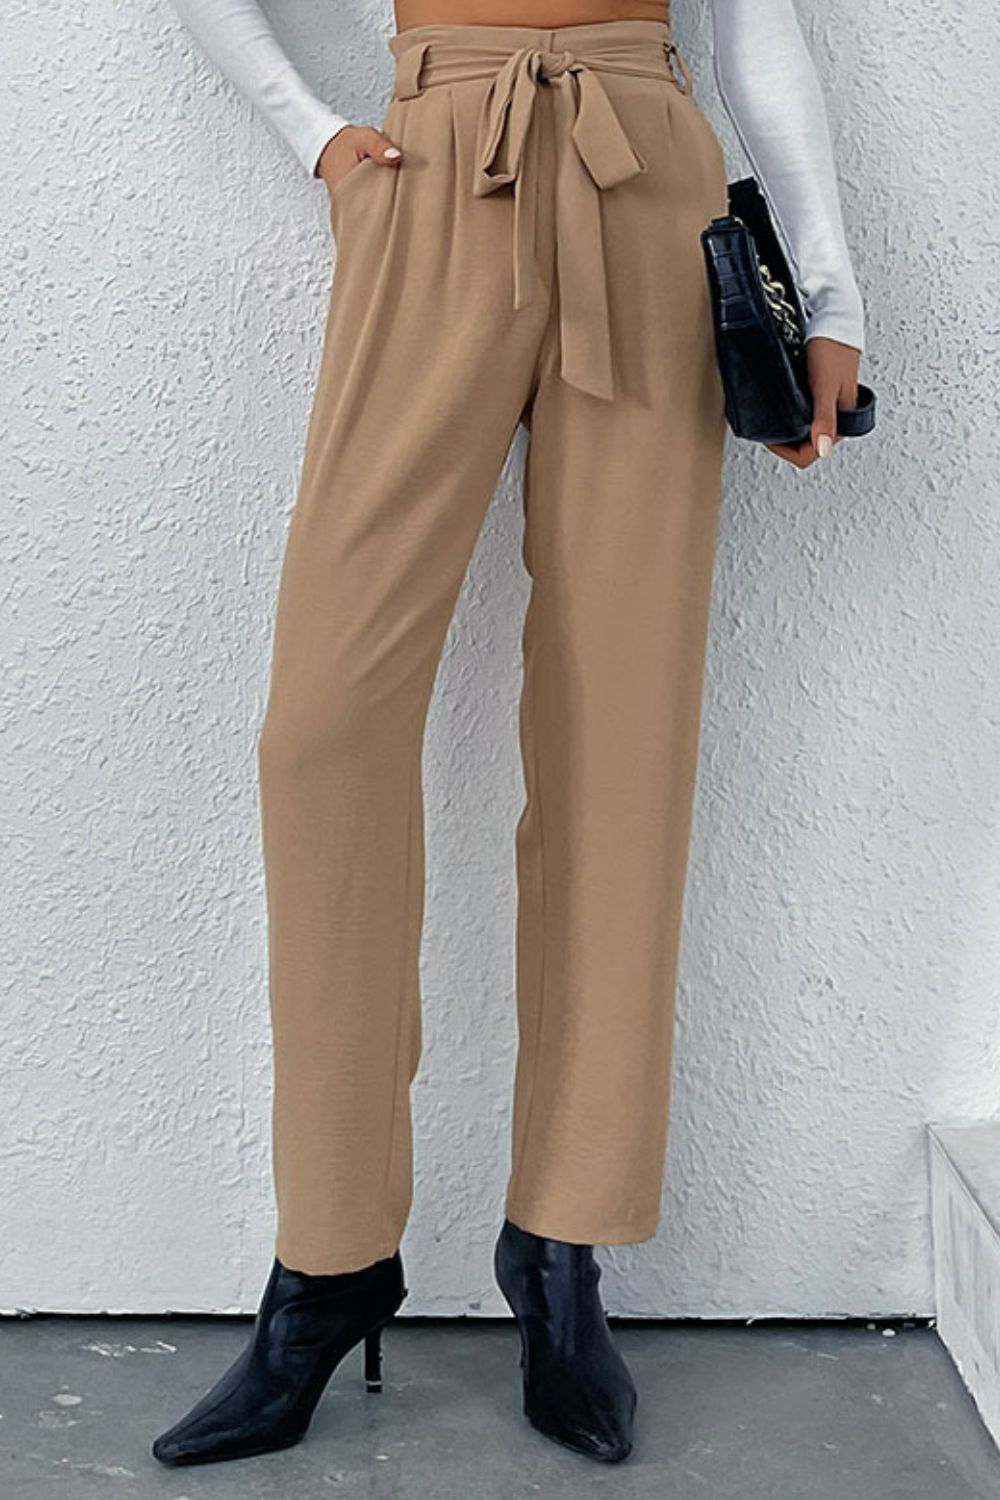 Belted Straight Leg Pants with Pockets - Khaki / S Girl Code